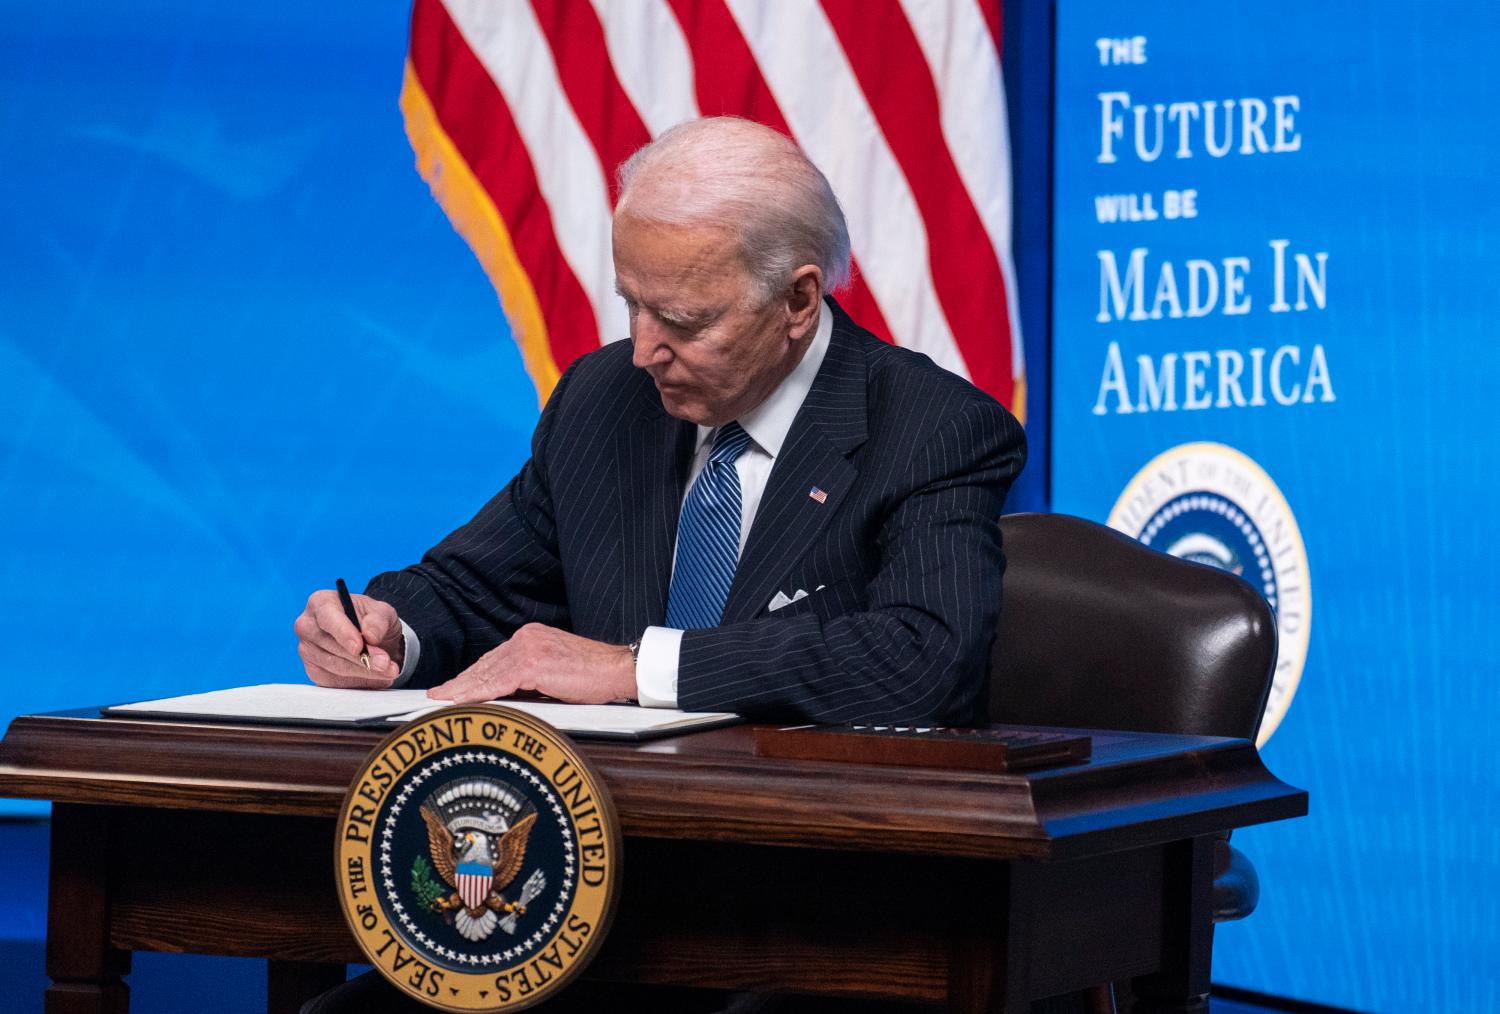 President Joe Biden signs an executive order related to American manufacturing and American workers.